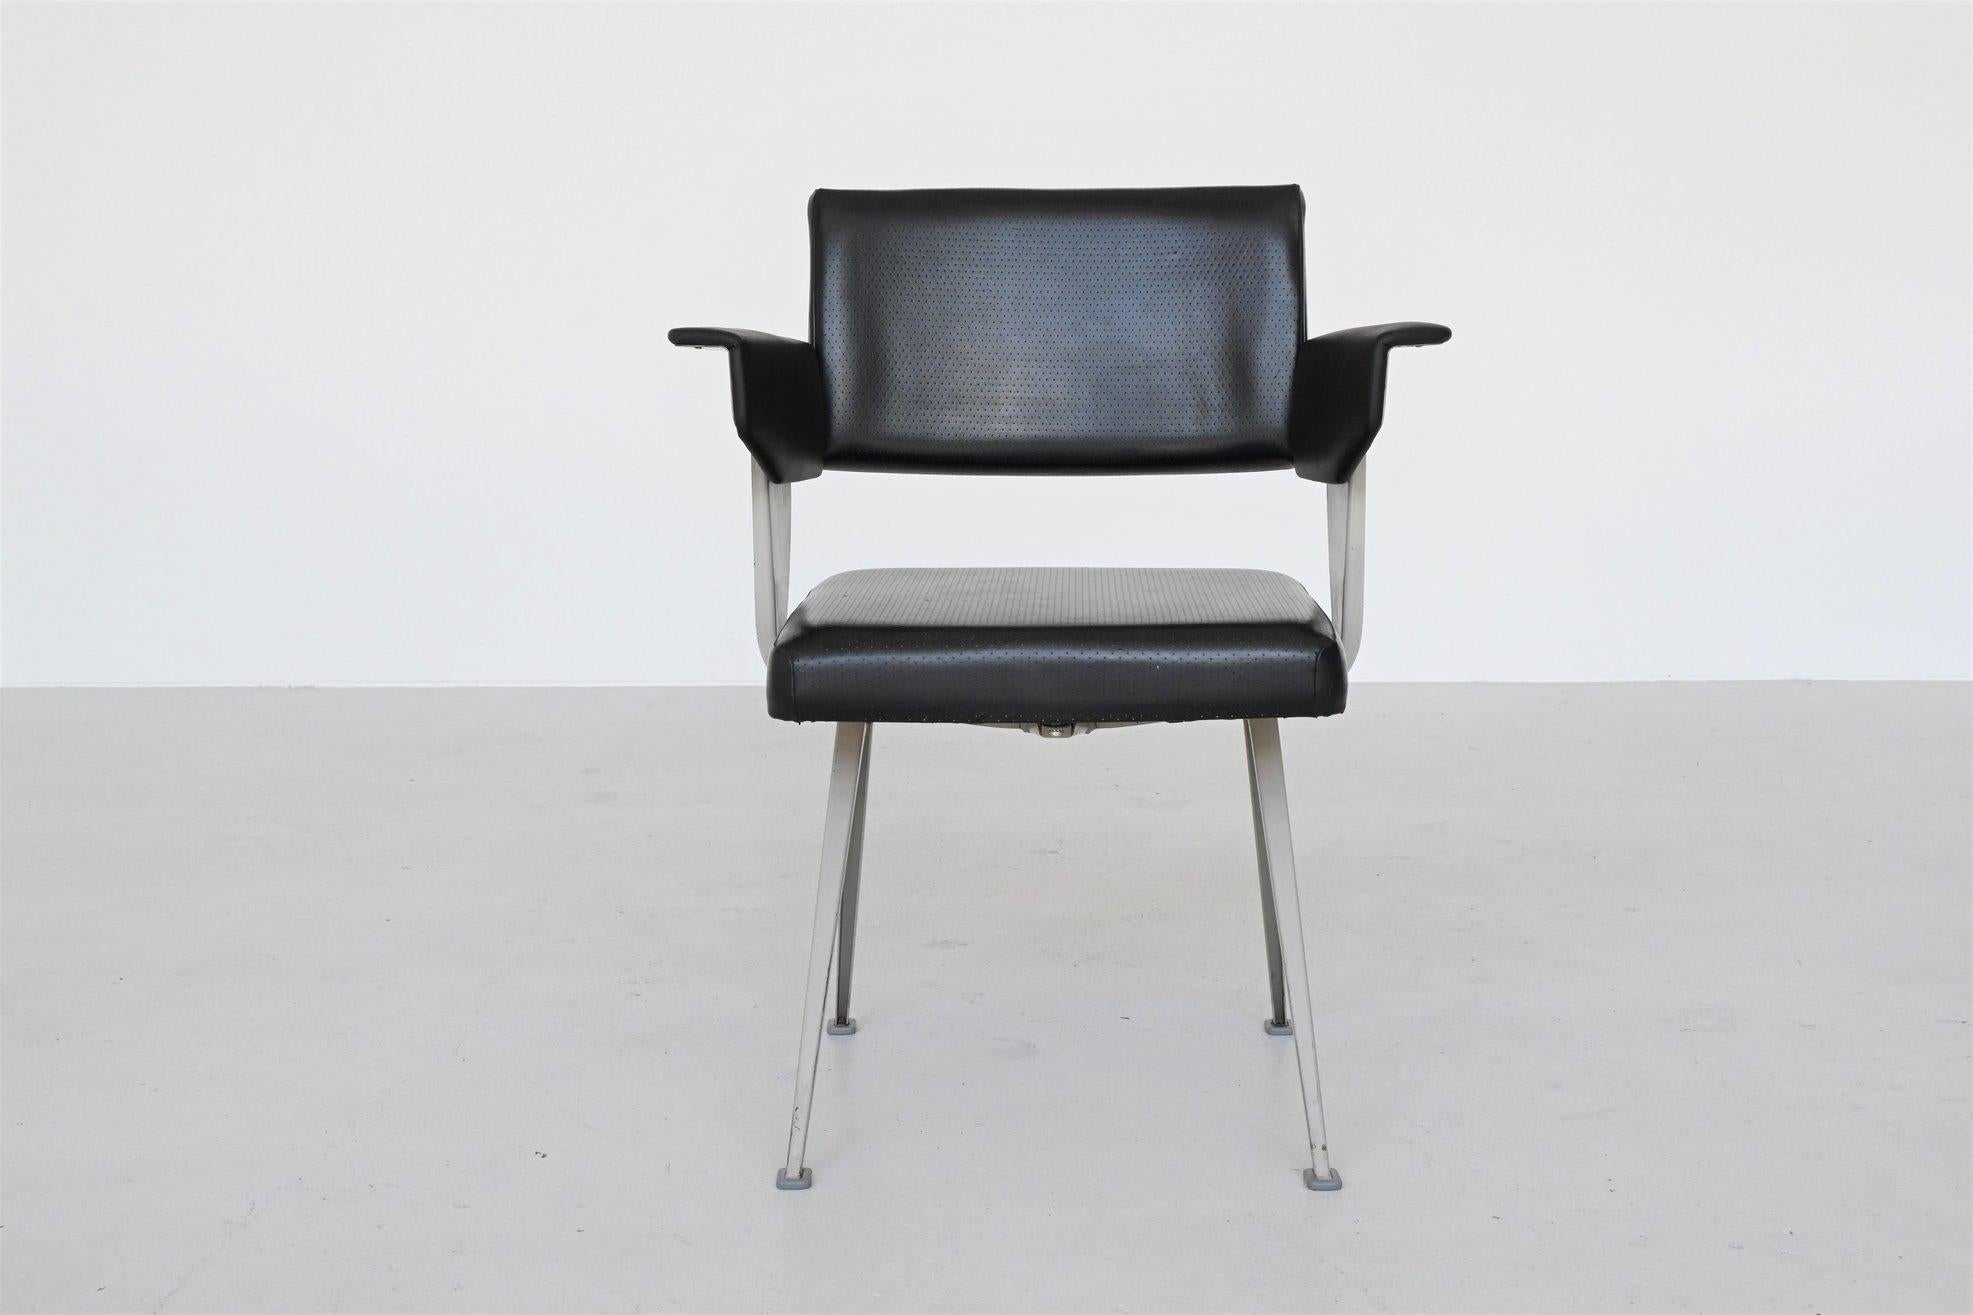 Industrial Resort armchair designed by Friso Kramer, manufactured by Ahrend de Cirkel, the Netherlands, 1960. The chair has a grey lacquered metal frame with V structure legs. The seat, back and arms are upholstered in black faux leather and are in